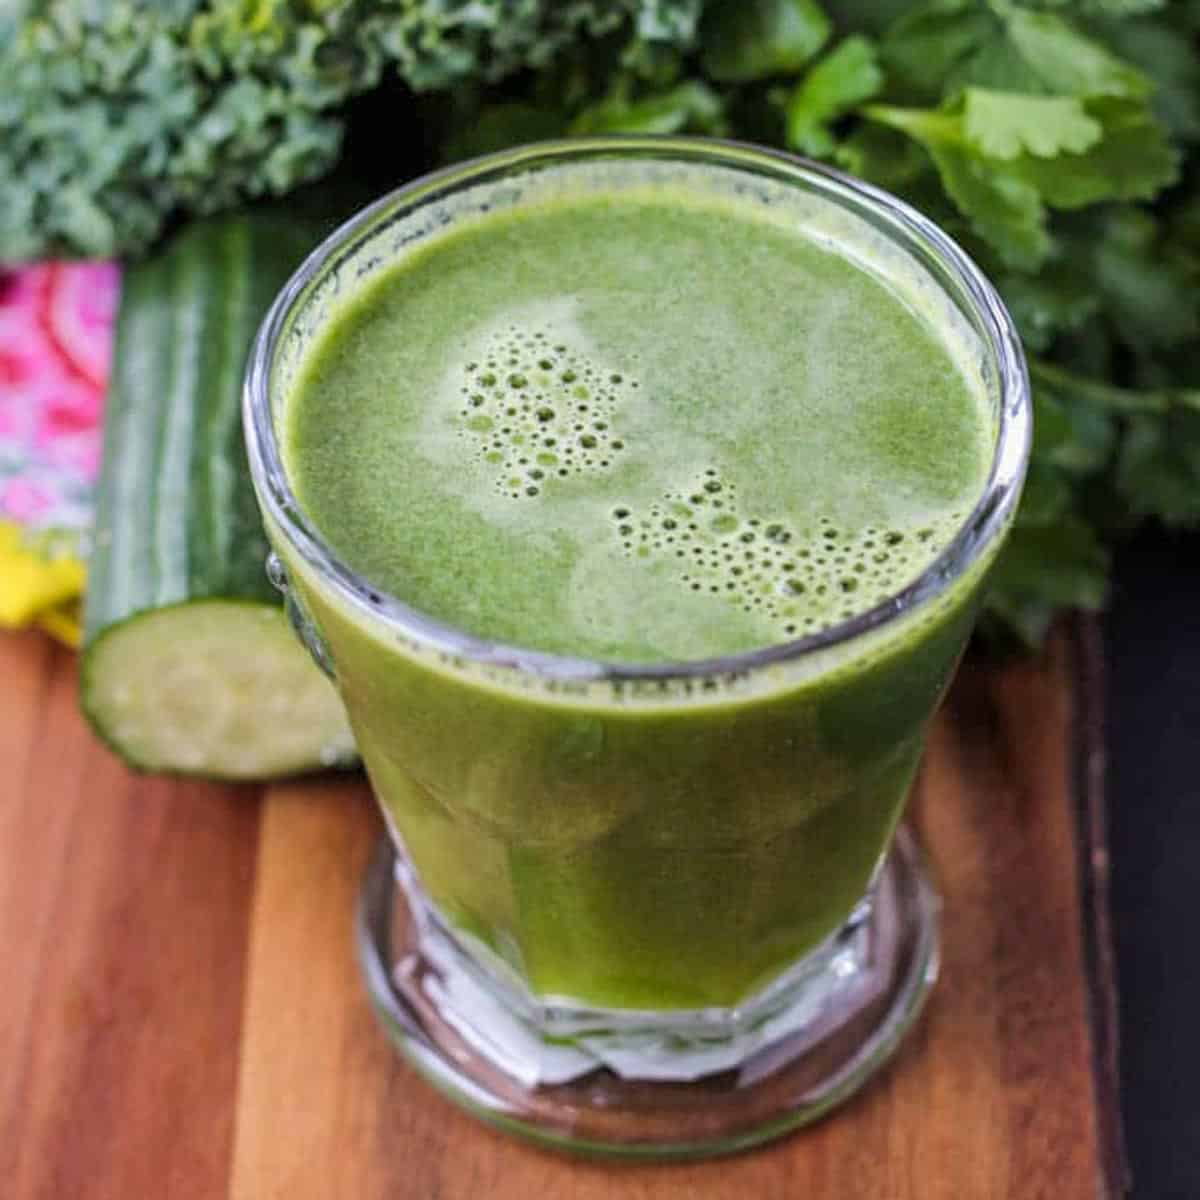 Glass of green juice surrounded by fresh produce.